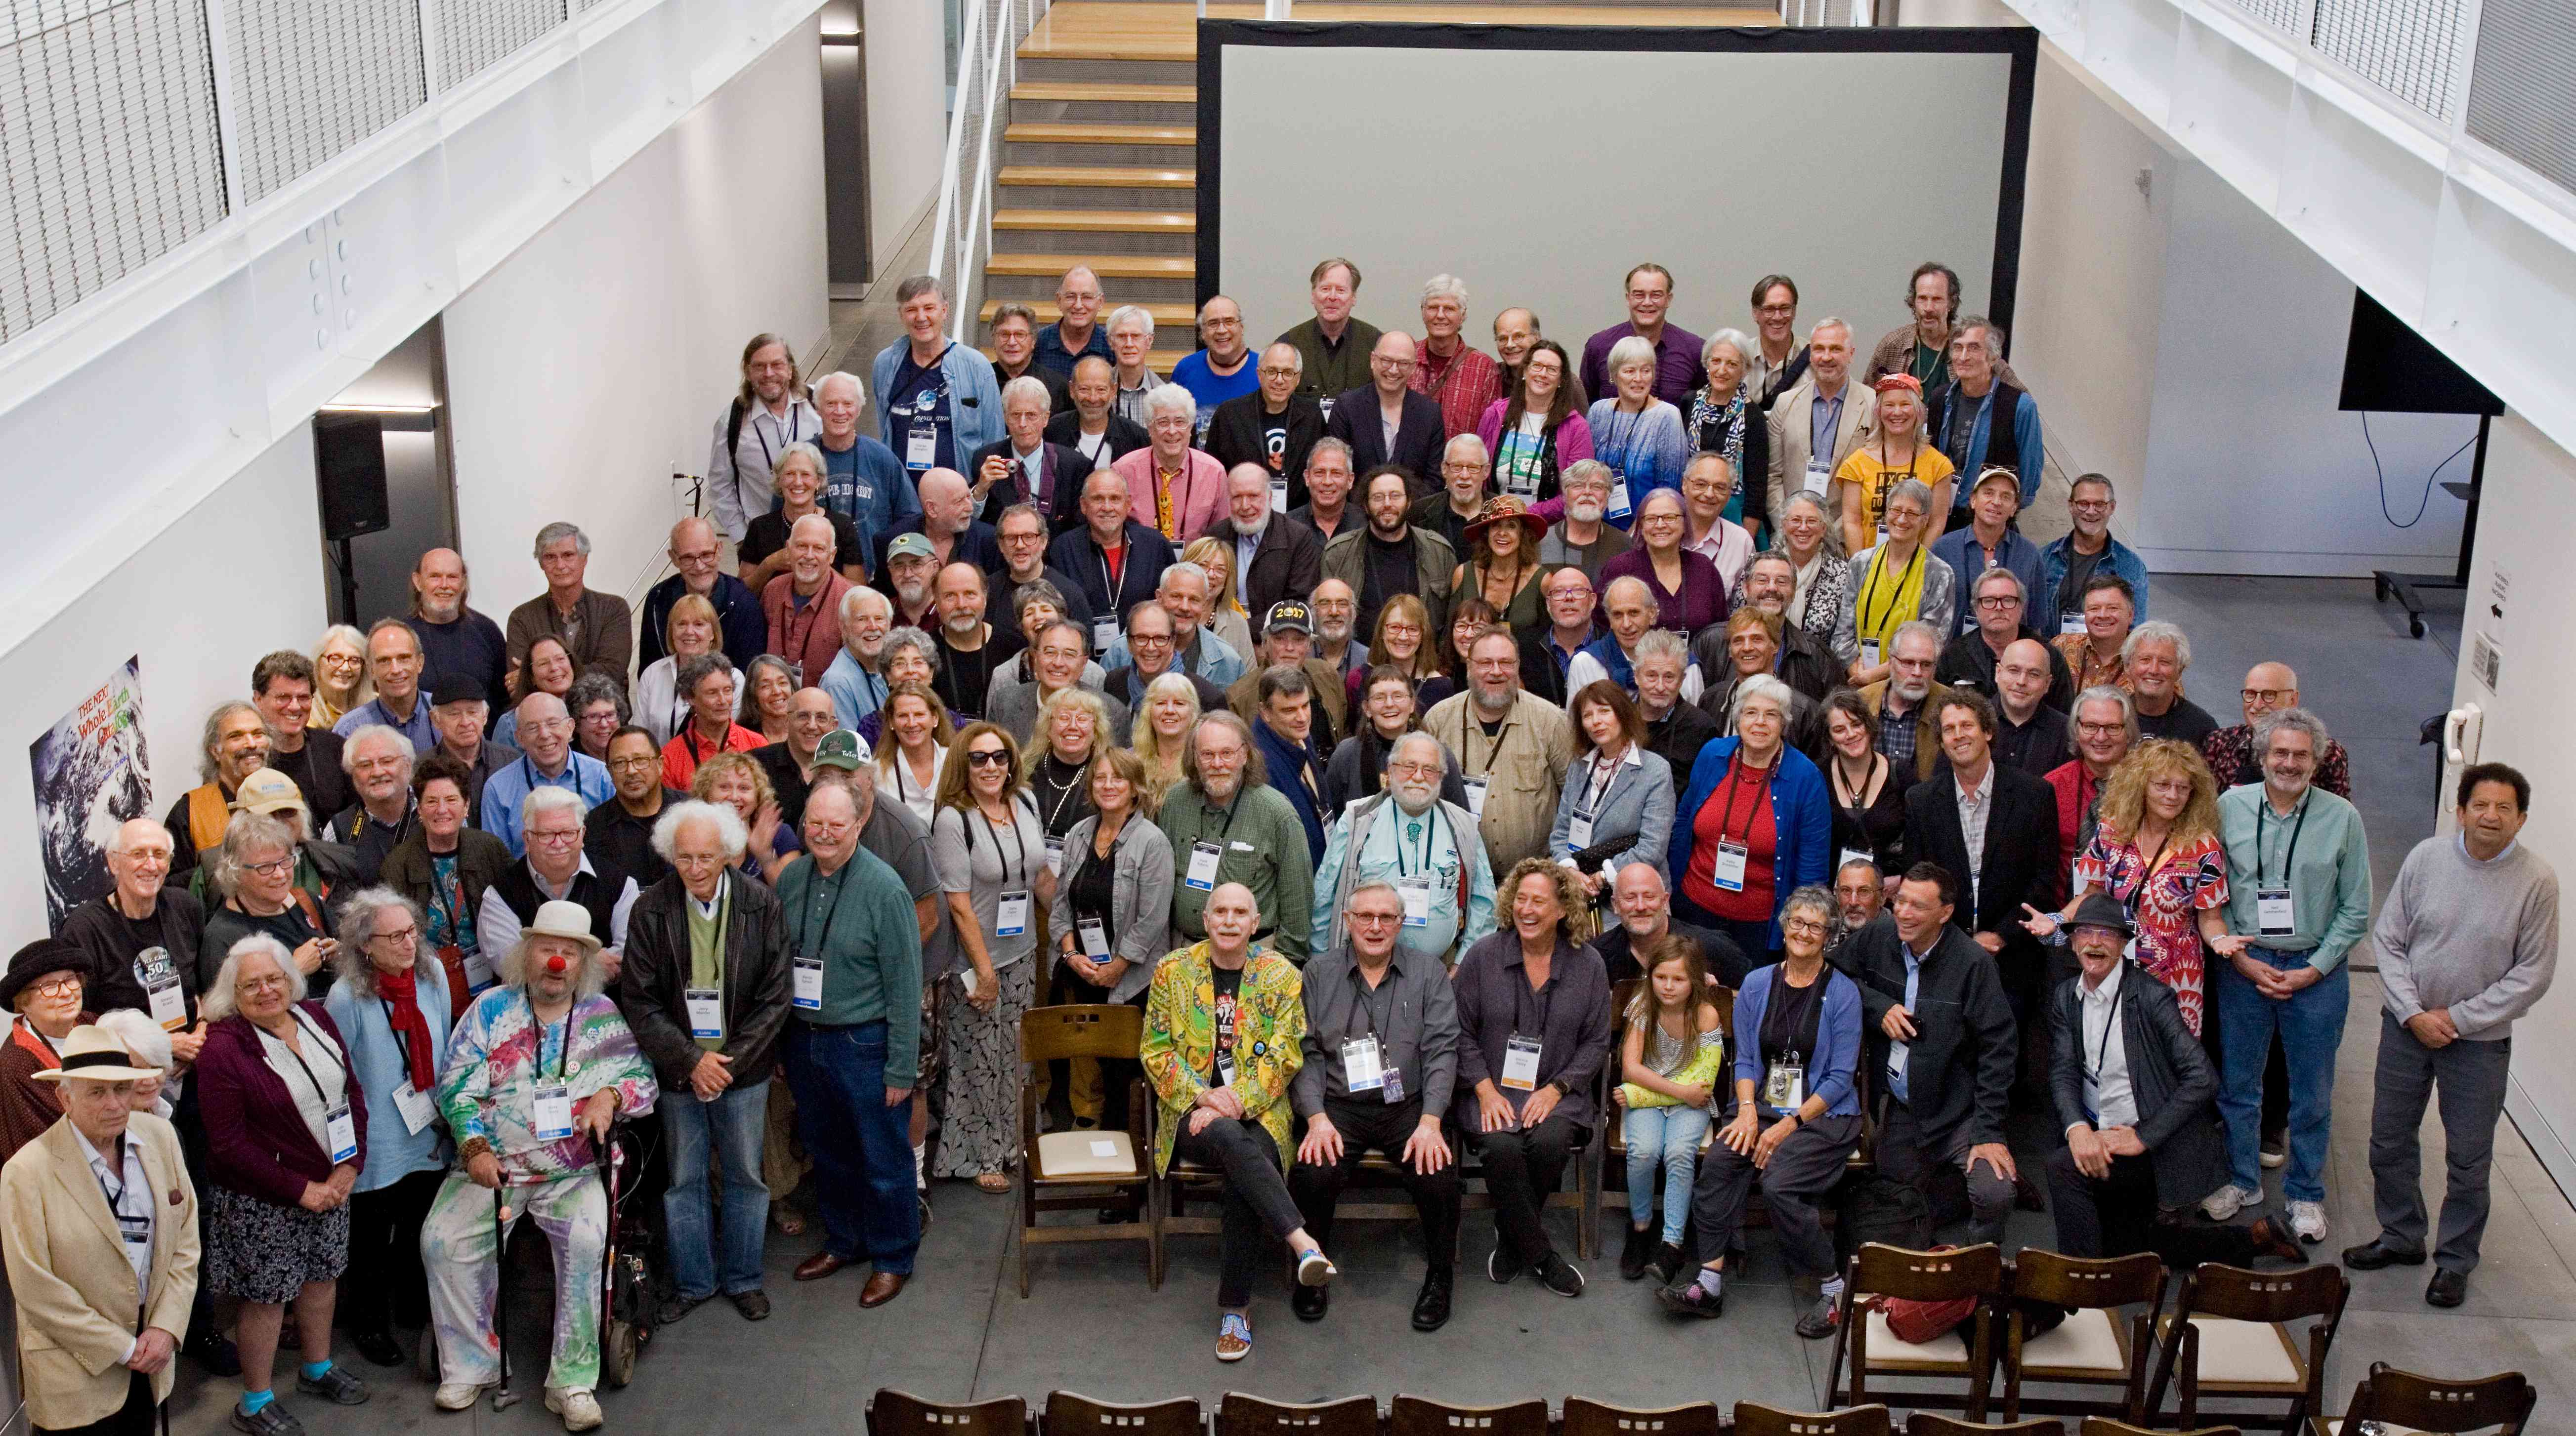 Whole Earth 50th Anniversary group photo by Gary Wilson